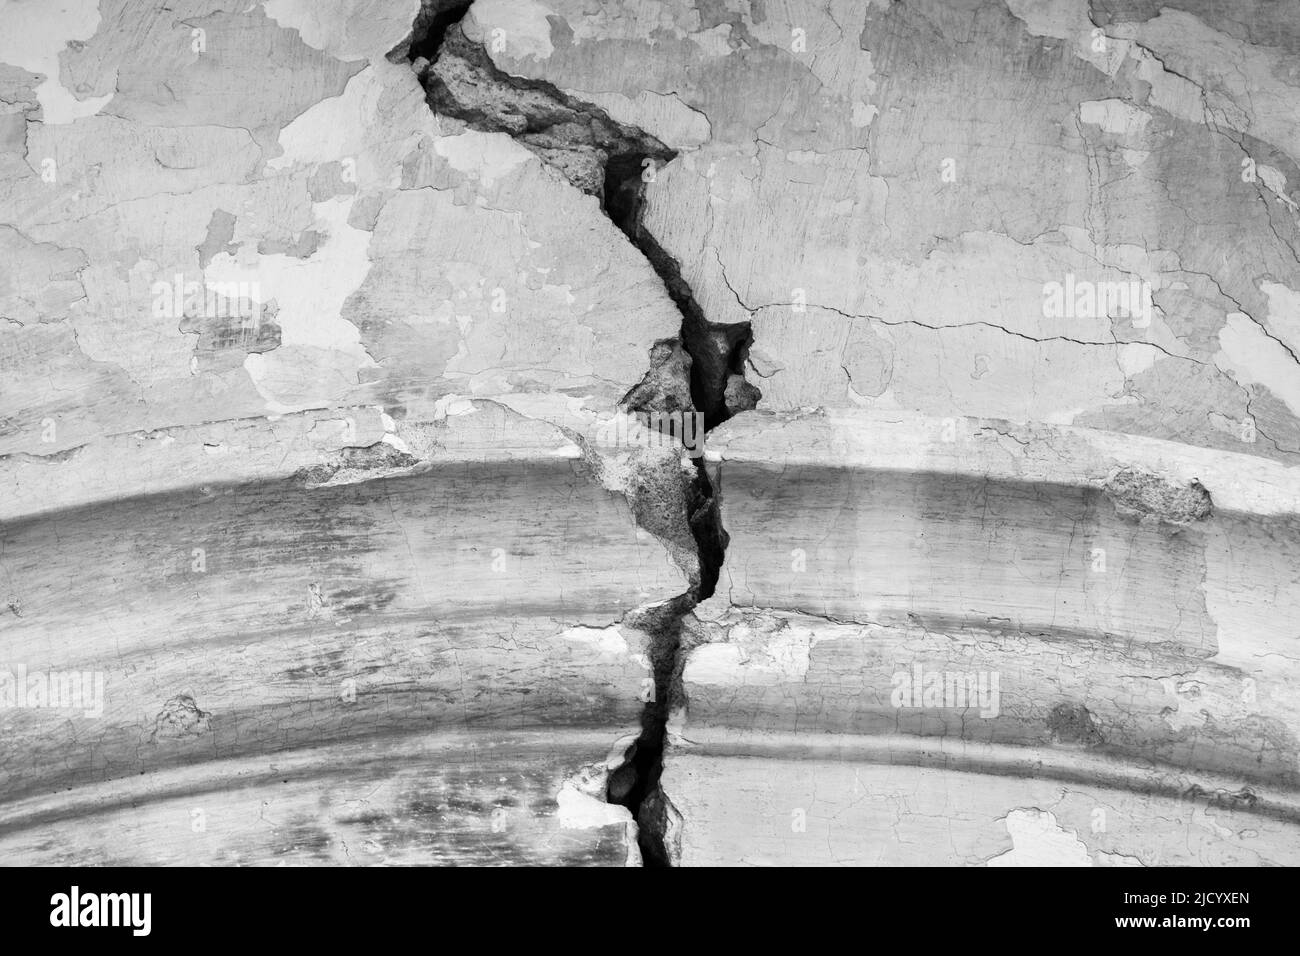 Big winding crack in arched structure, abstract image of vertical cleft. Black and white photo. Close-up. Copy space. Selective focus. Stock Photo